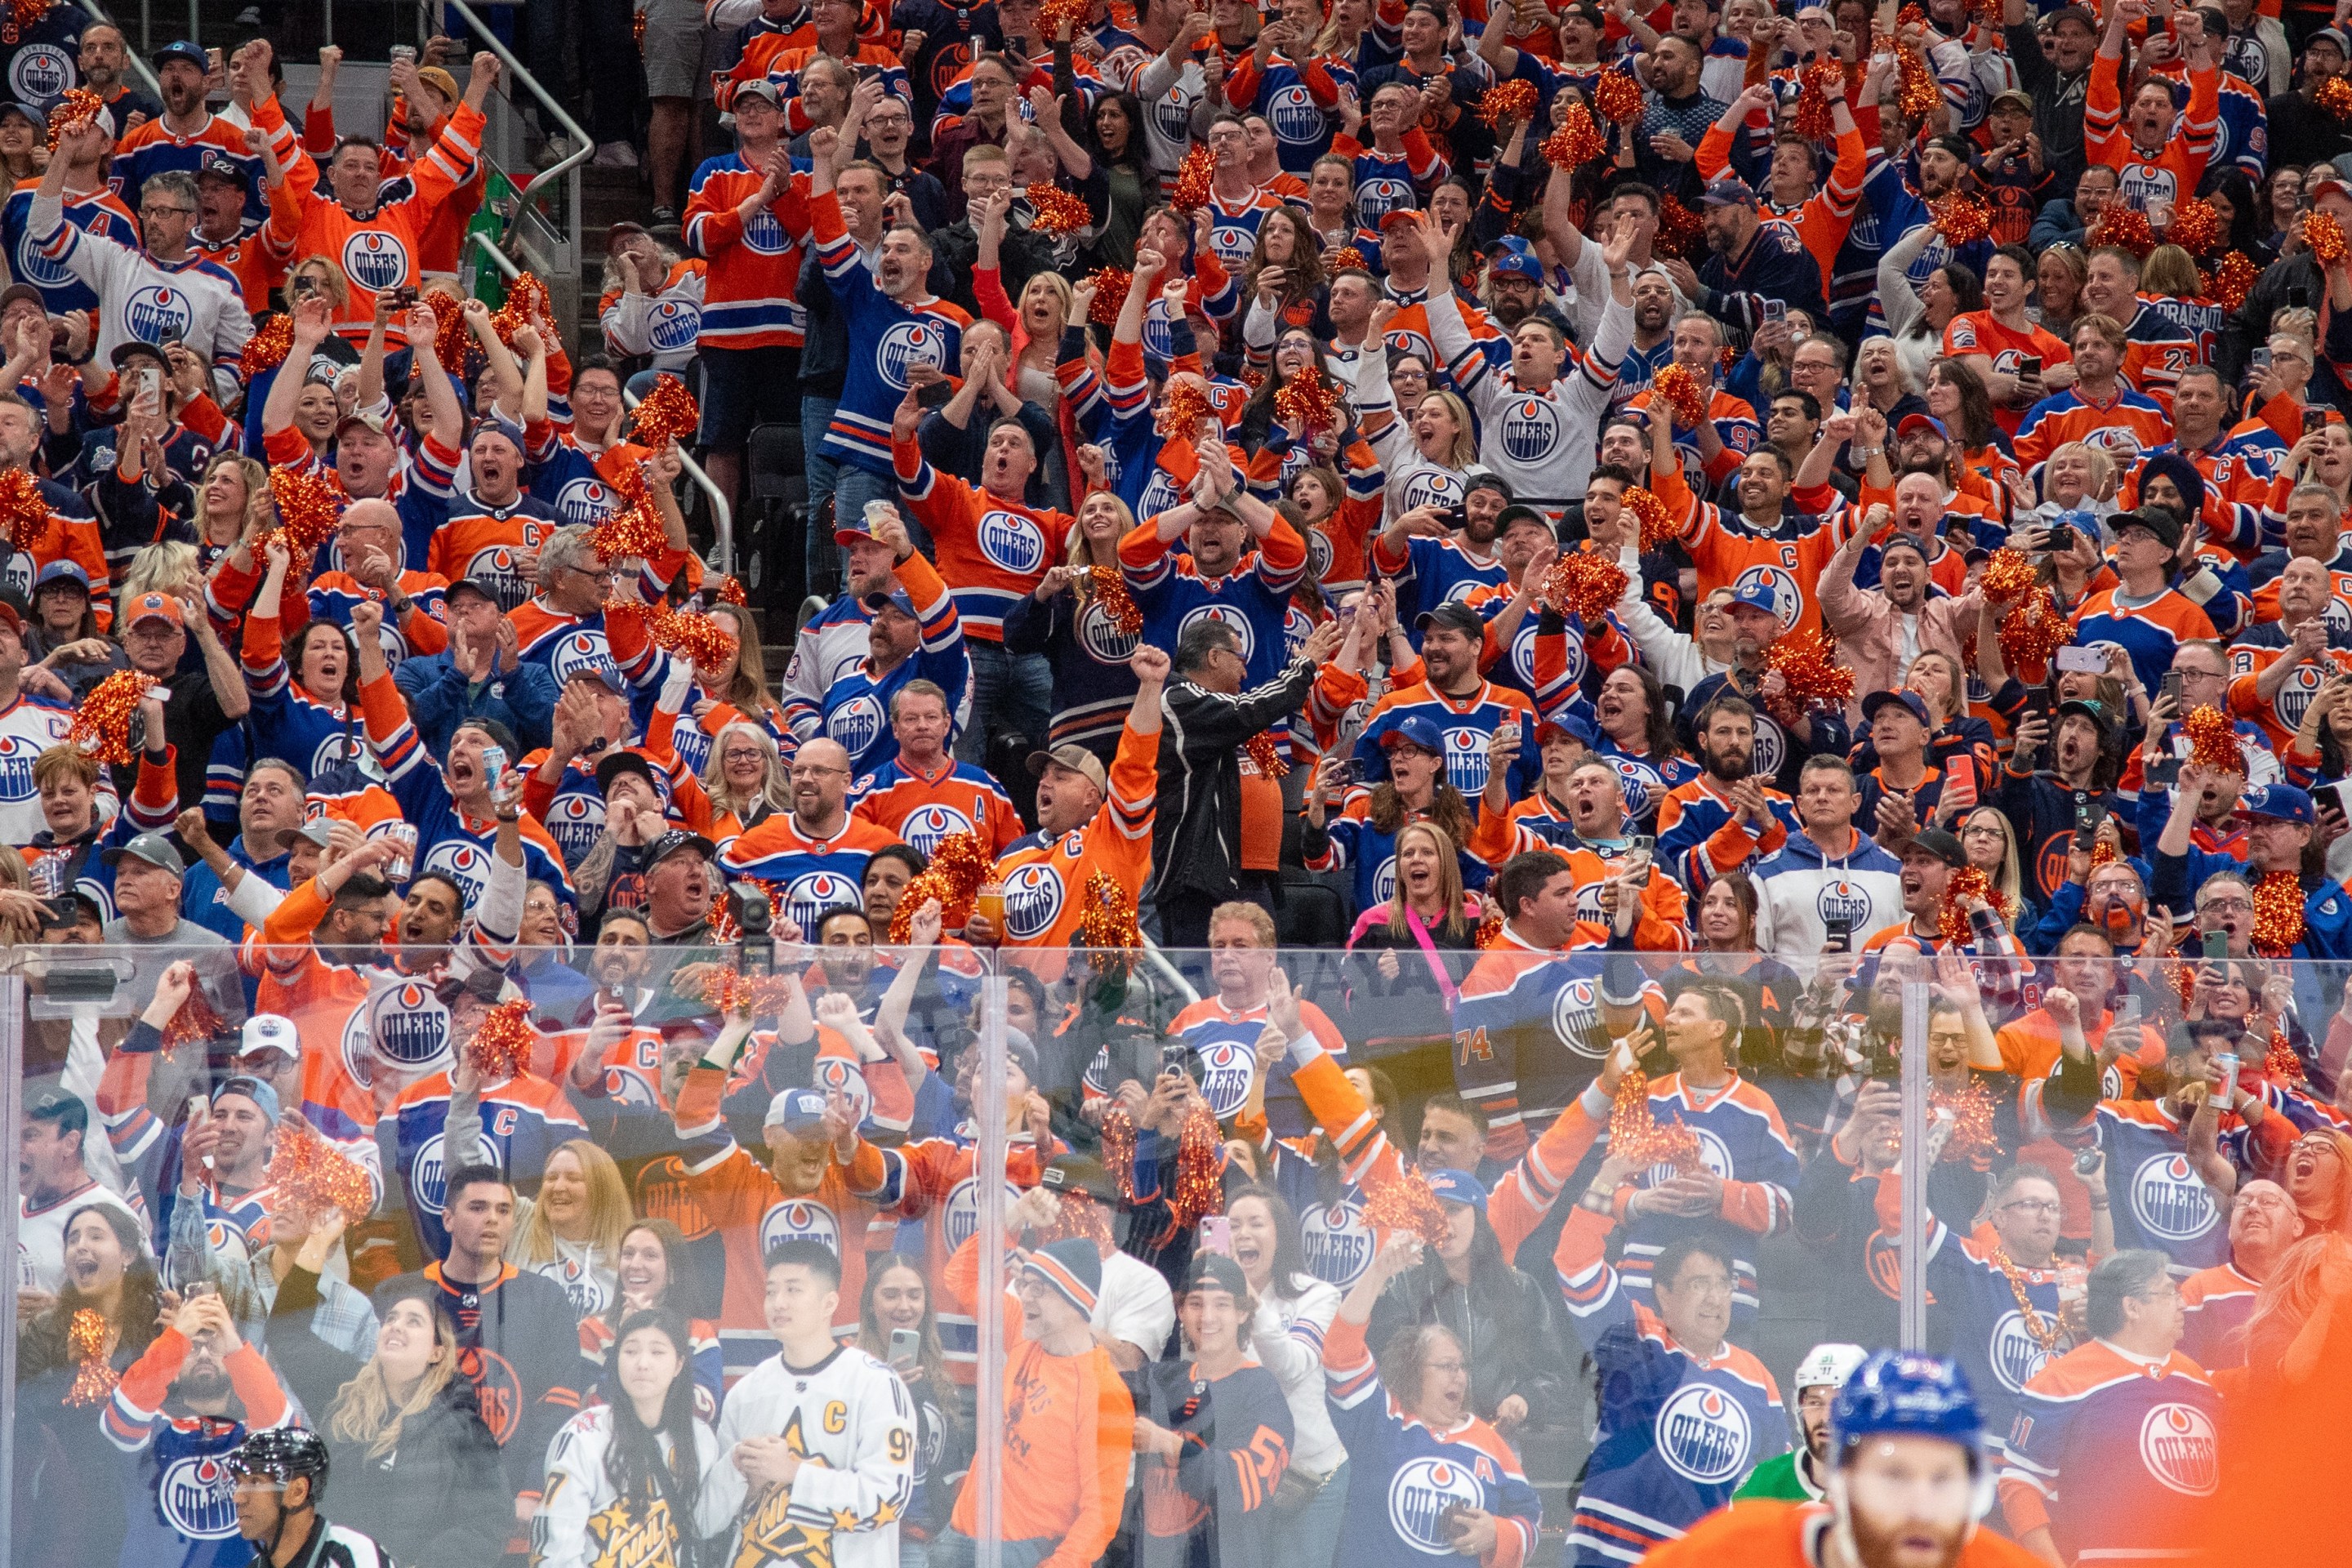 EDMONTON, CANADA - JUNE 02: Fans cheer on the Edmonton Oilers in Game Six of the Western Conference Final of the 2024 Stanley Cup Playoffs against the Dallas Stars at Rogers Place on June 2, 2024, in Edmonton, Alberta, Canada. (Photo by Andy Devlin/NHLI via Getty Images)